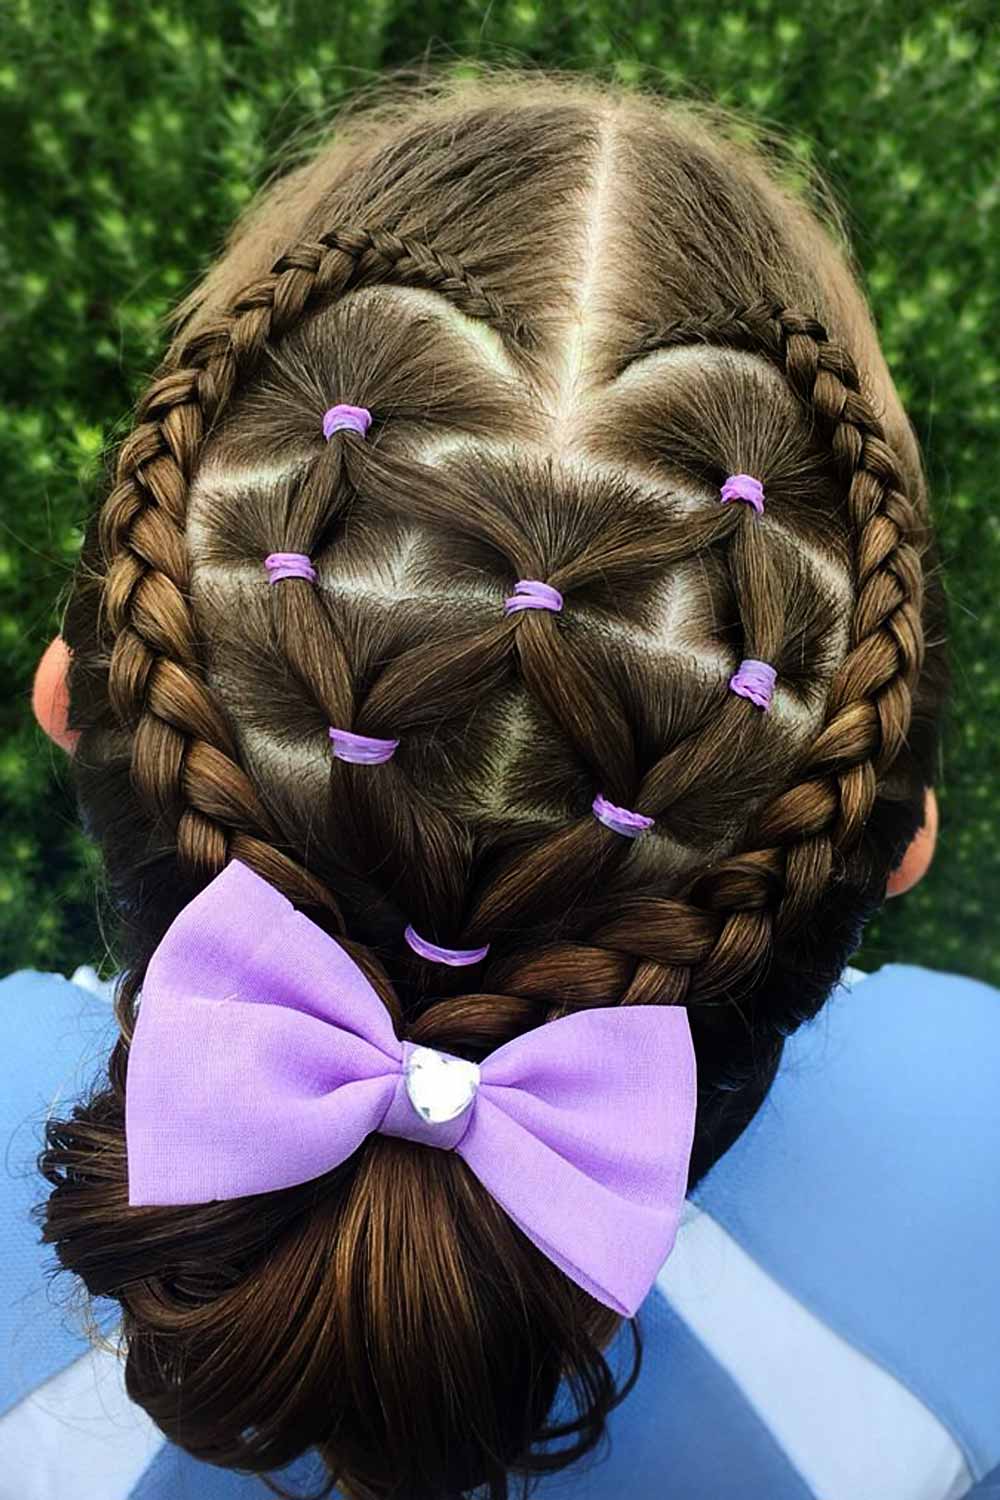 Criss Cross Rubber Band Hairstyles for Girls #rubberbandhairstyles #naturalhairstyles #kidshairstyles